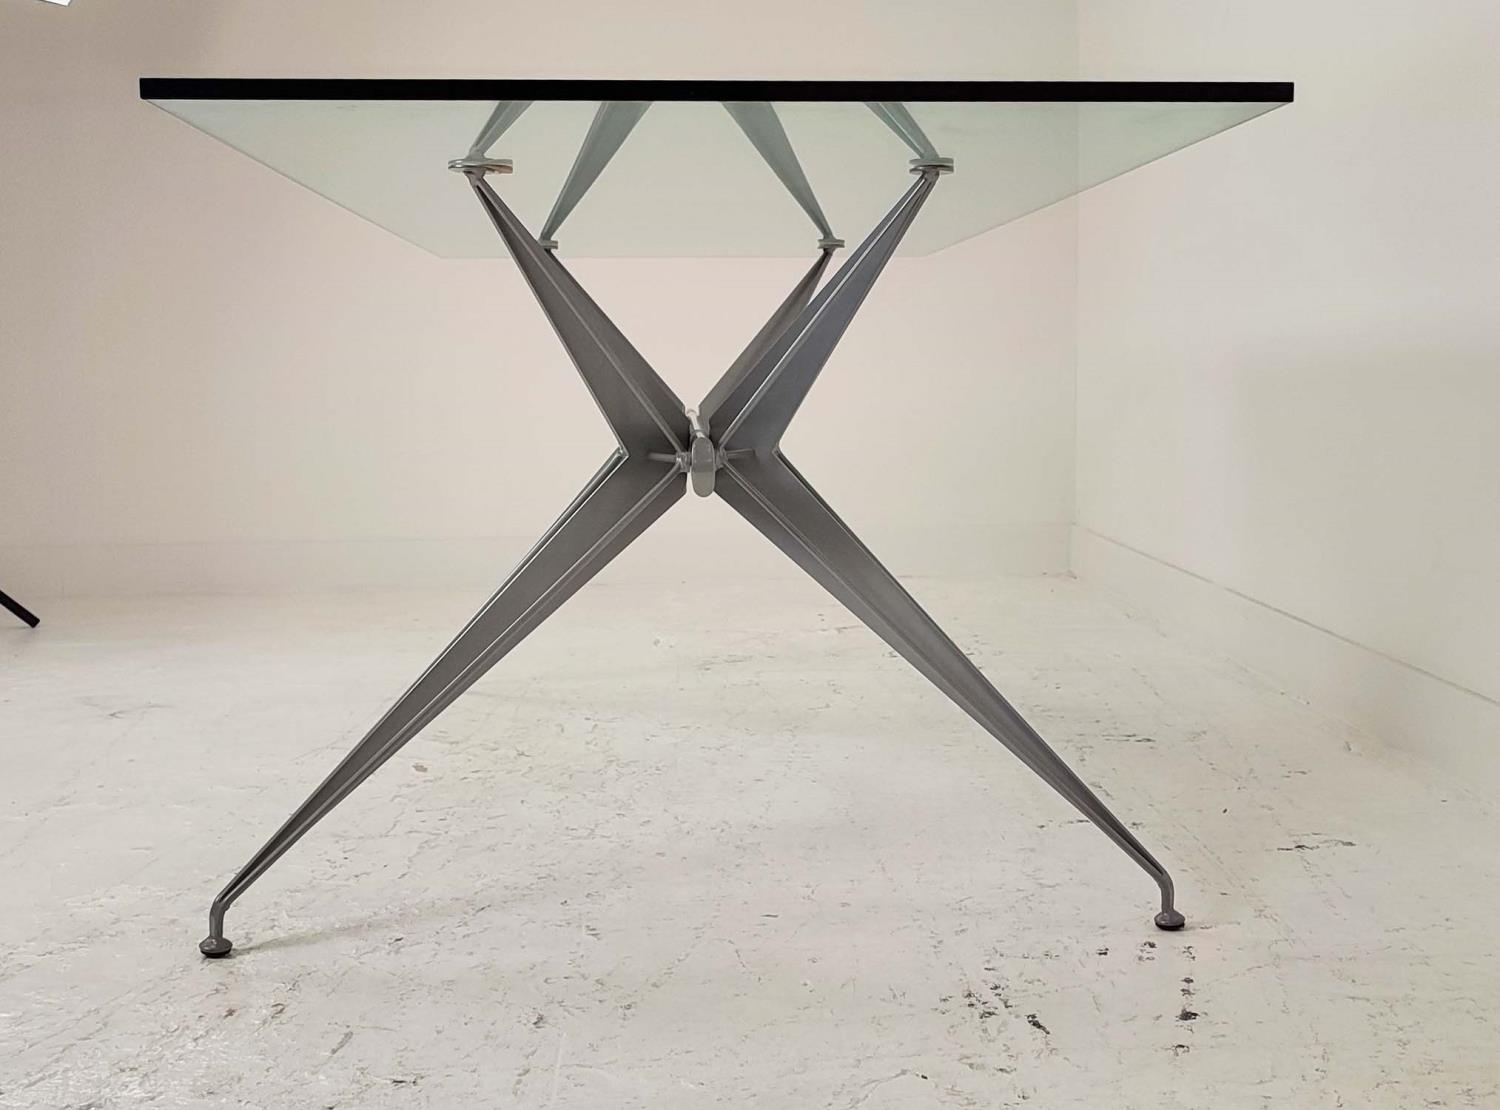 ATRIBUTED TO FASEM DINING TABLE, by Studio Archirivolto, glass top on metal base, 180cm x 85cm x - Image 6 of 8